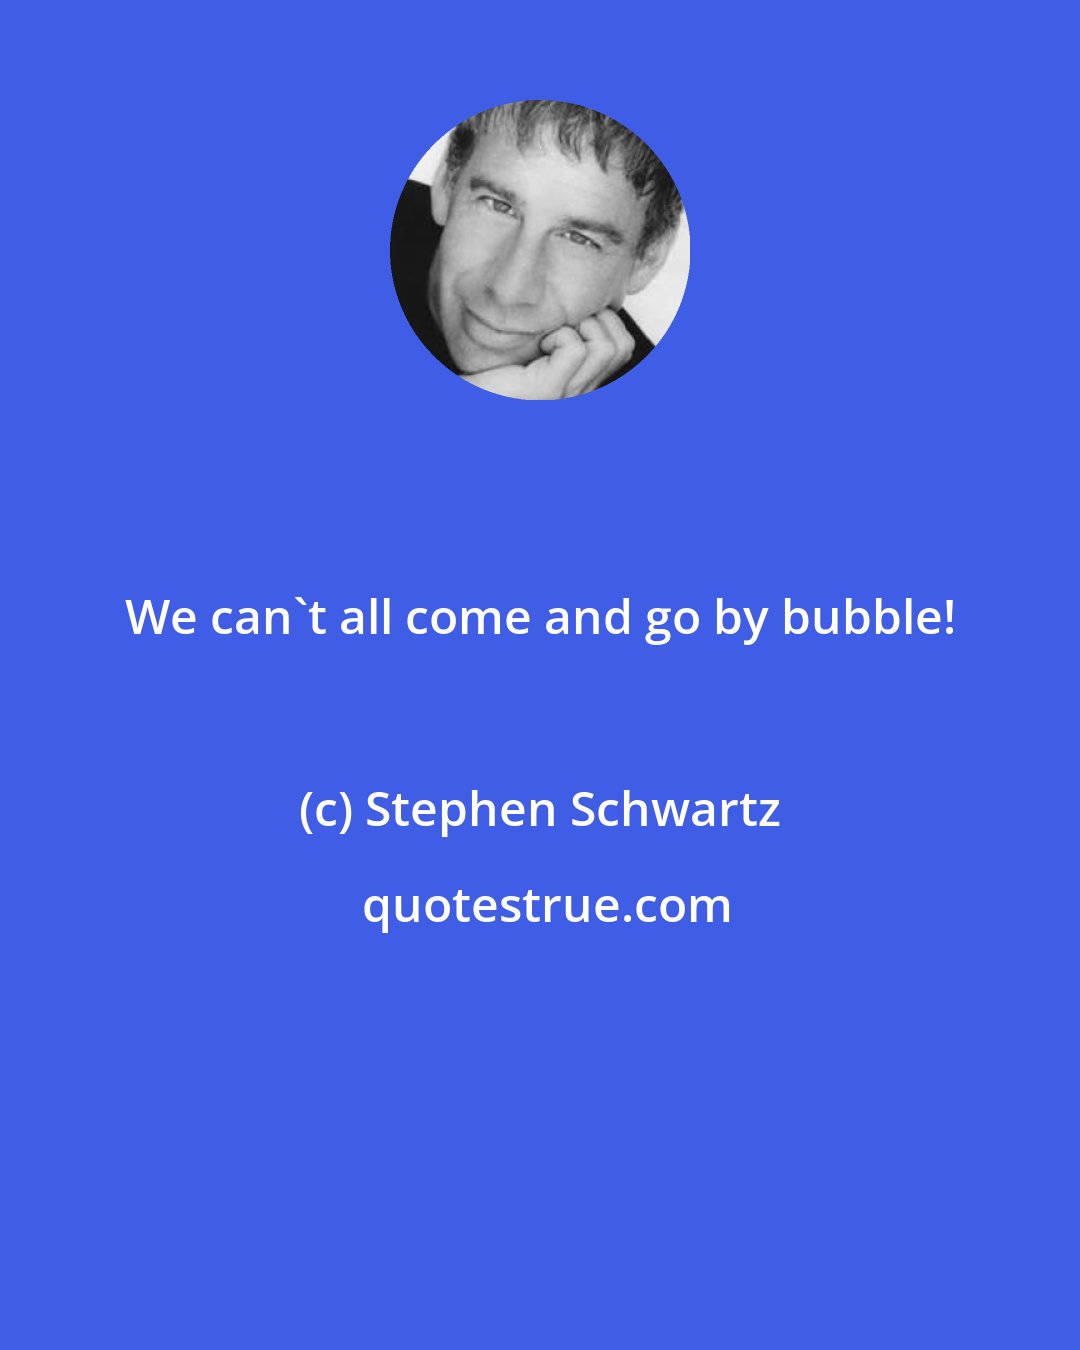 Stephen Schwartz: We can't all come and go by bubble!